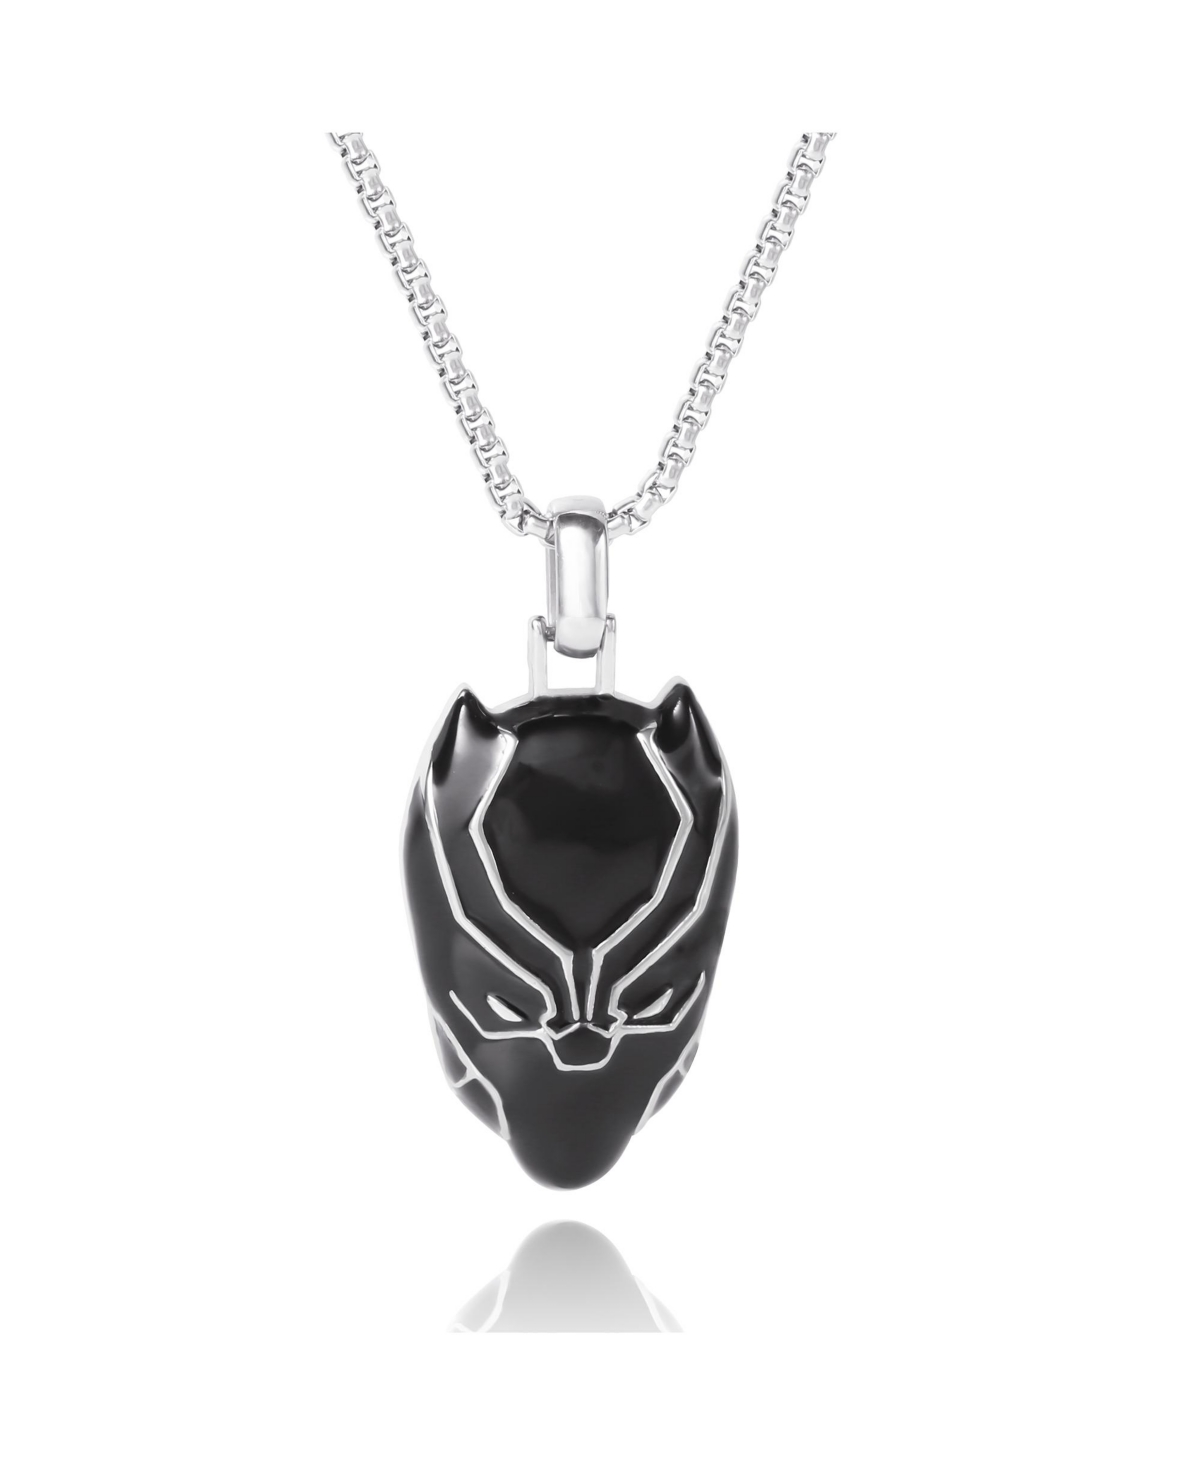 Men's Black Panther Black Enamel and Stainless Steel Pendant Necklace, 22'' Box Chain - Silver tone, black